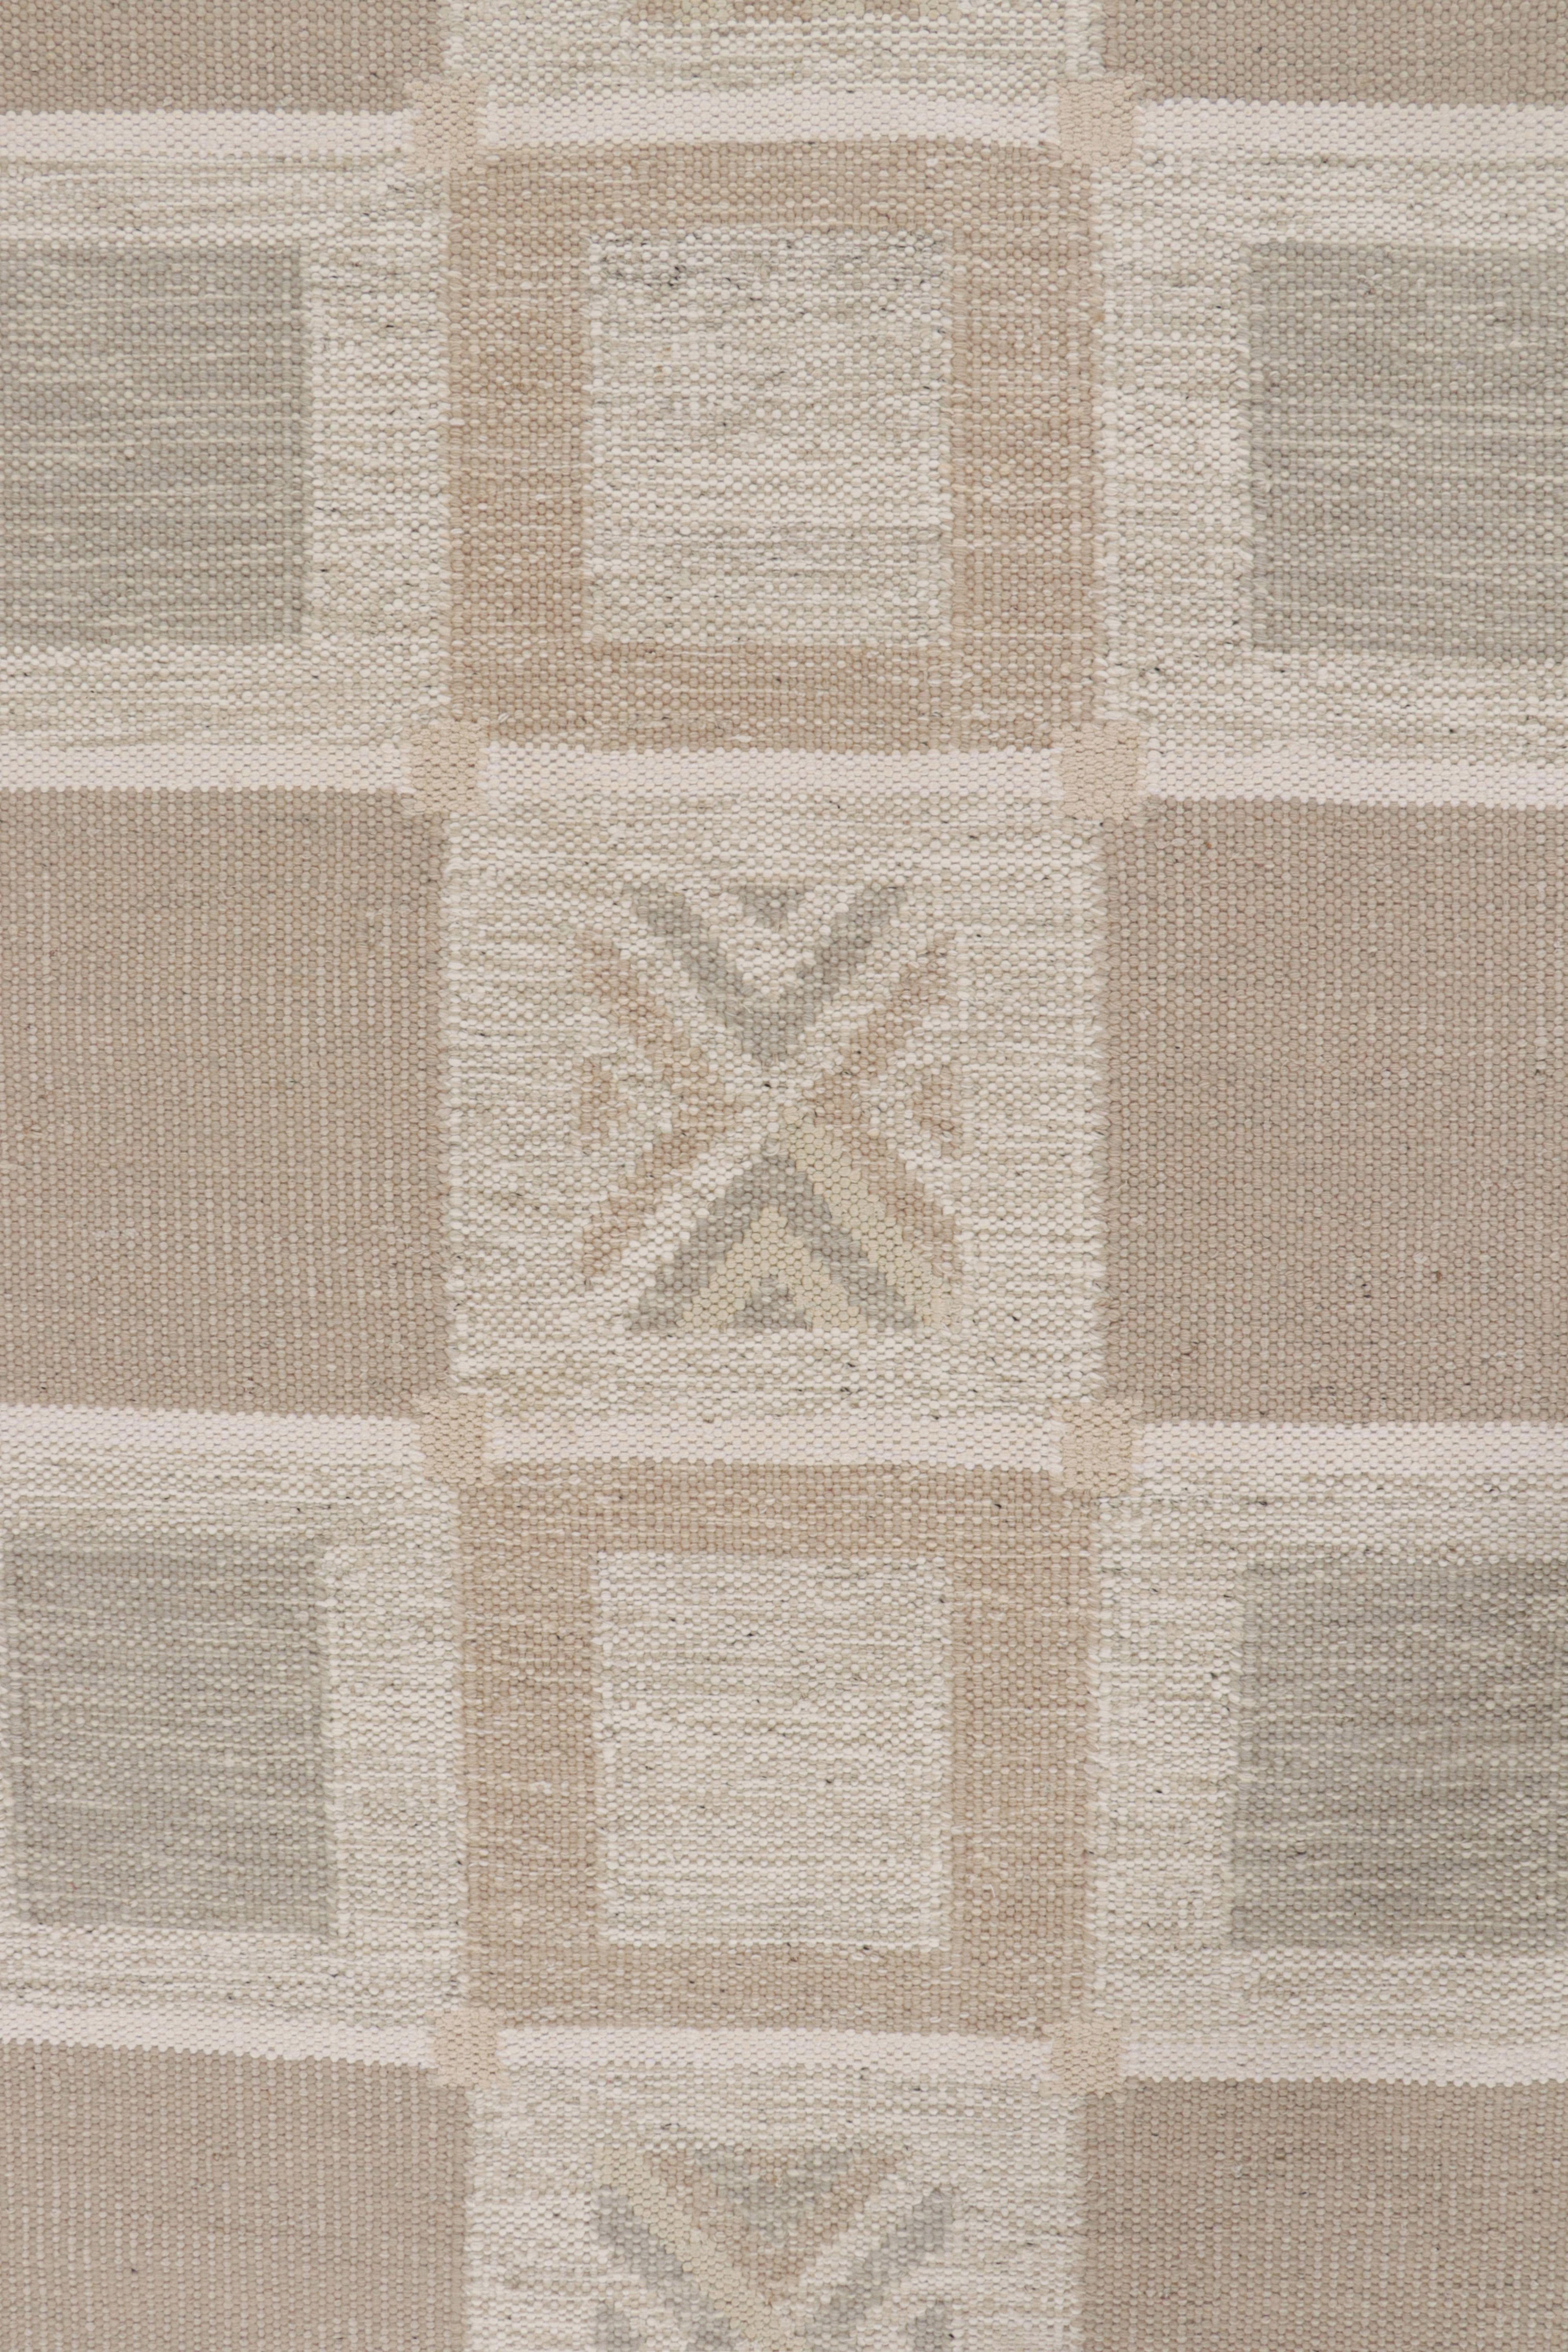 Rug & Kilim’s Scandinavian Style custom Kilim in Brown, gray & White In New Condition For Sale In Long Island City, NY